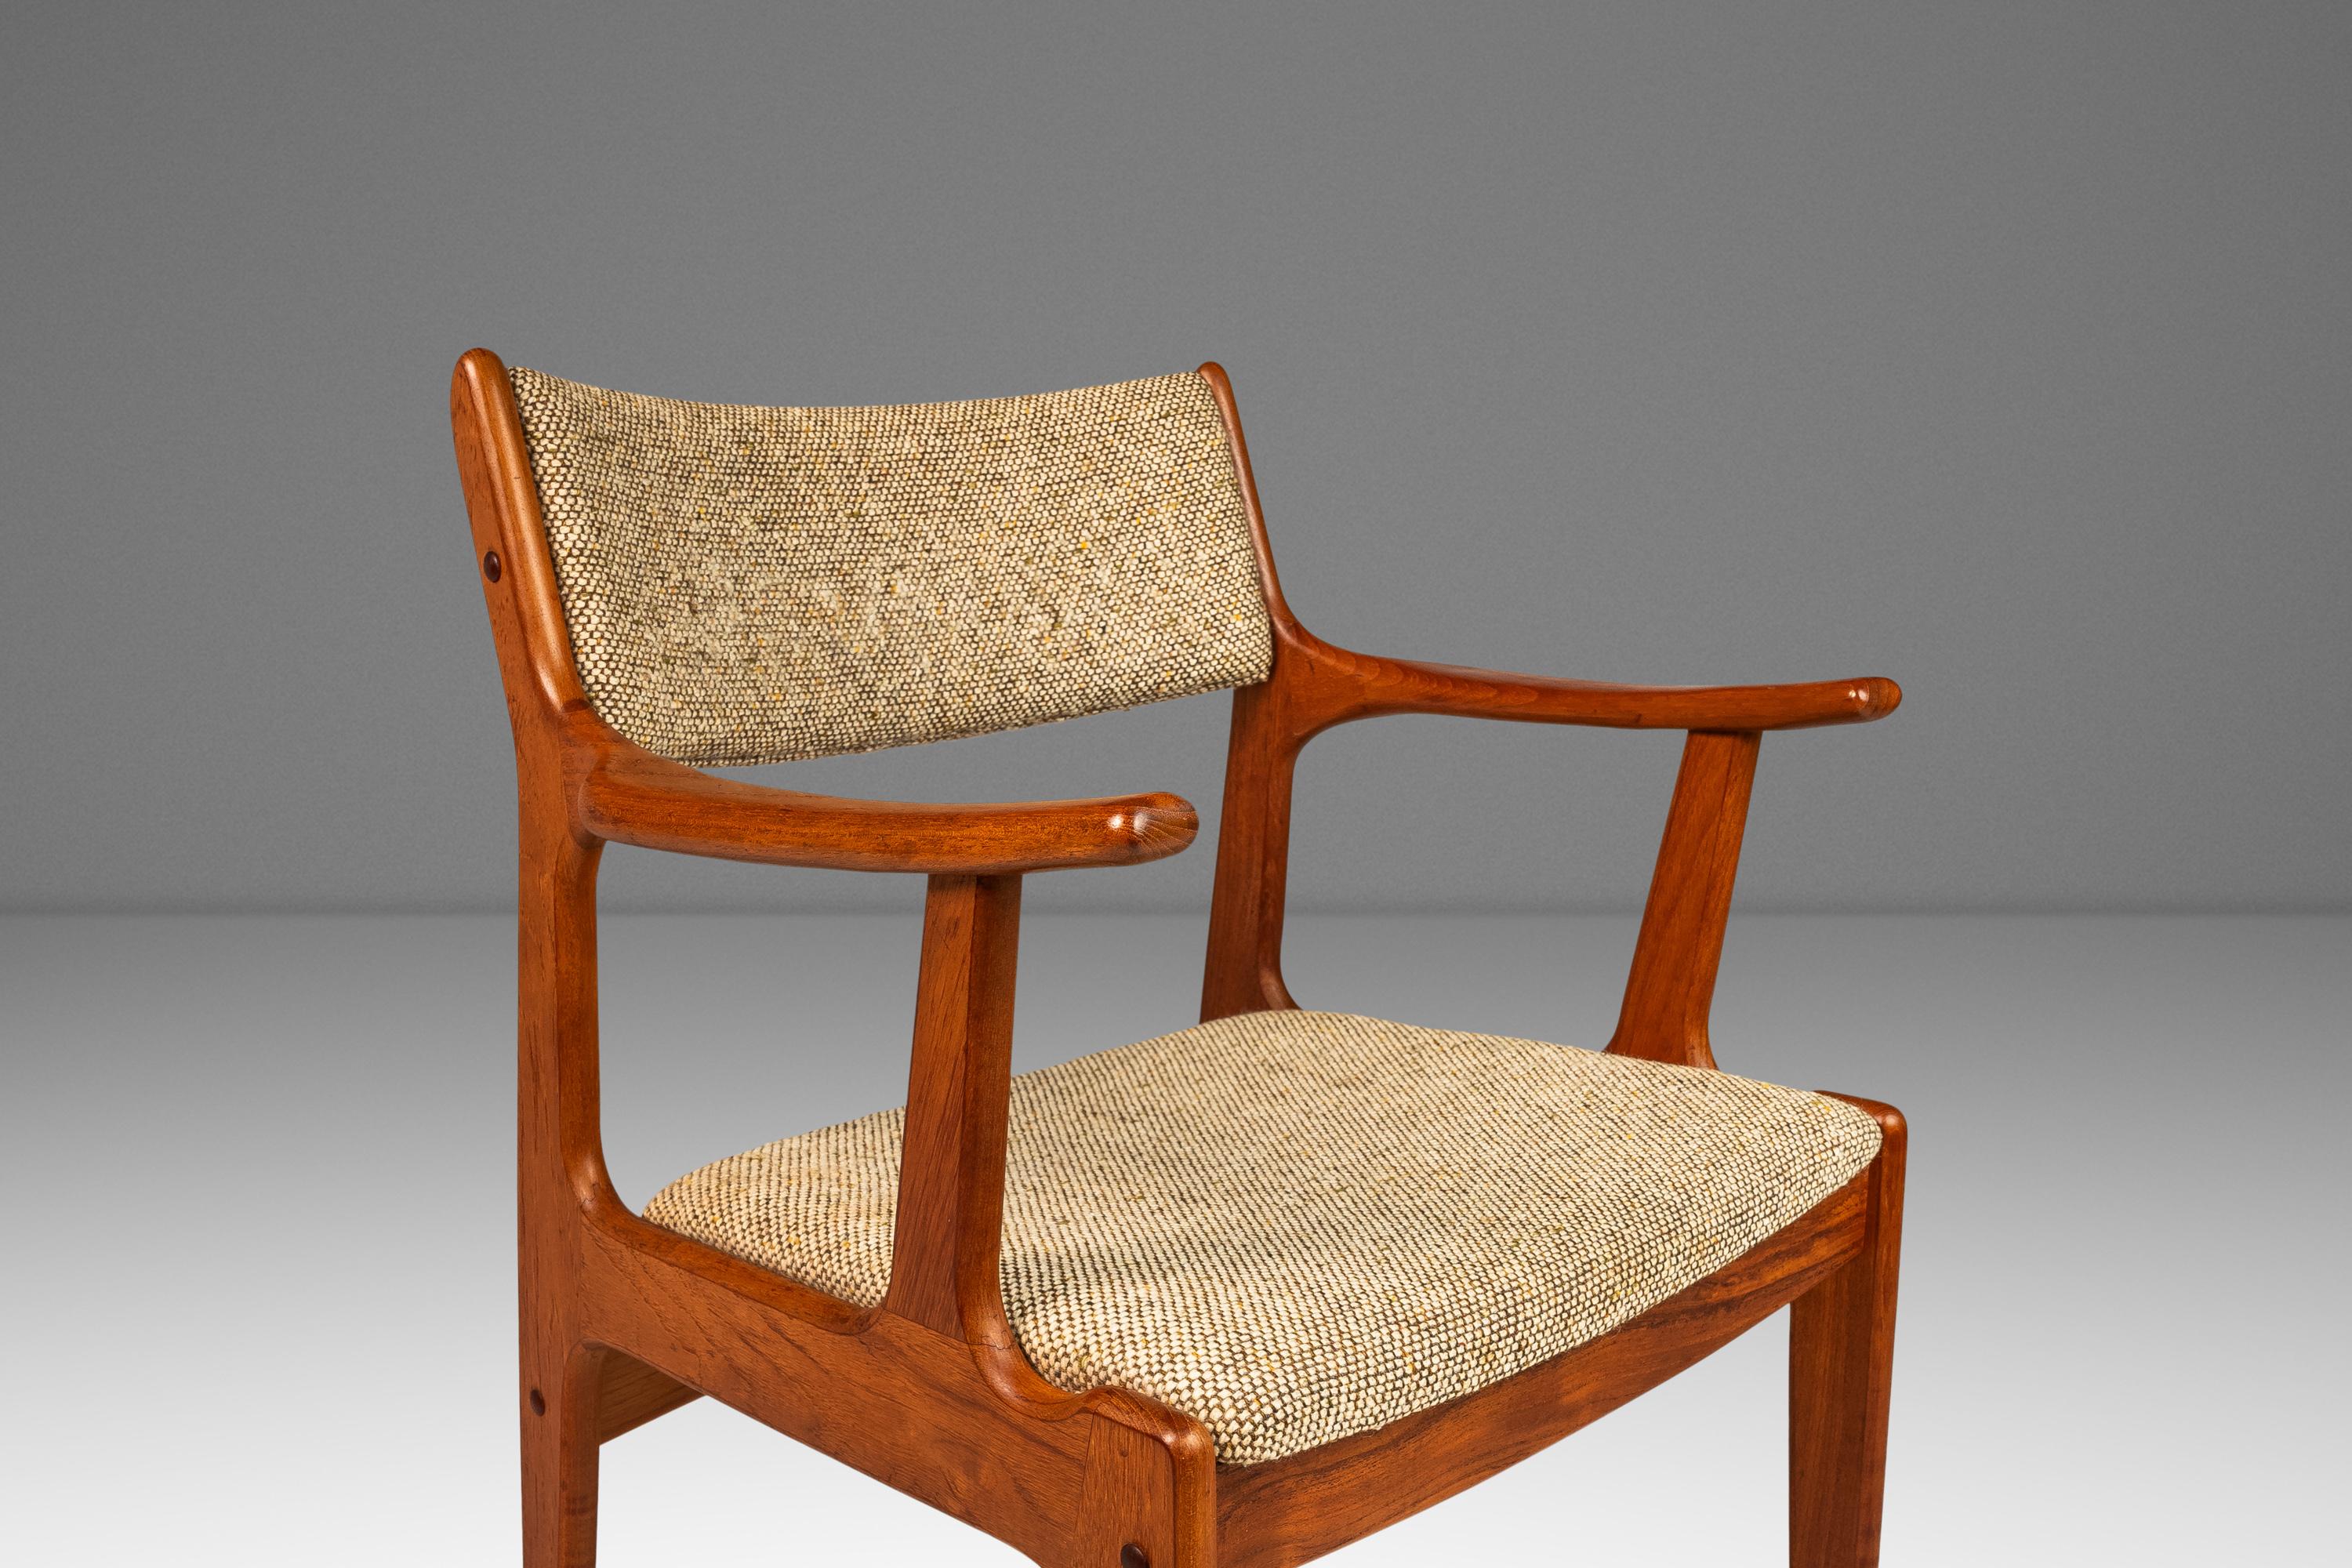 Danish Mid-Century Arm Chair in Solid Teak & Original Fabric by D-Scan, c. 1970s For Sale 10